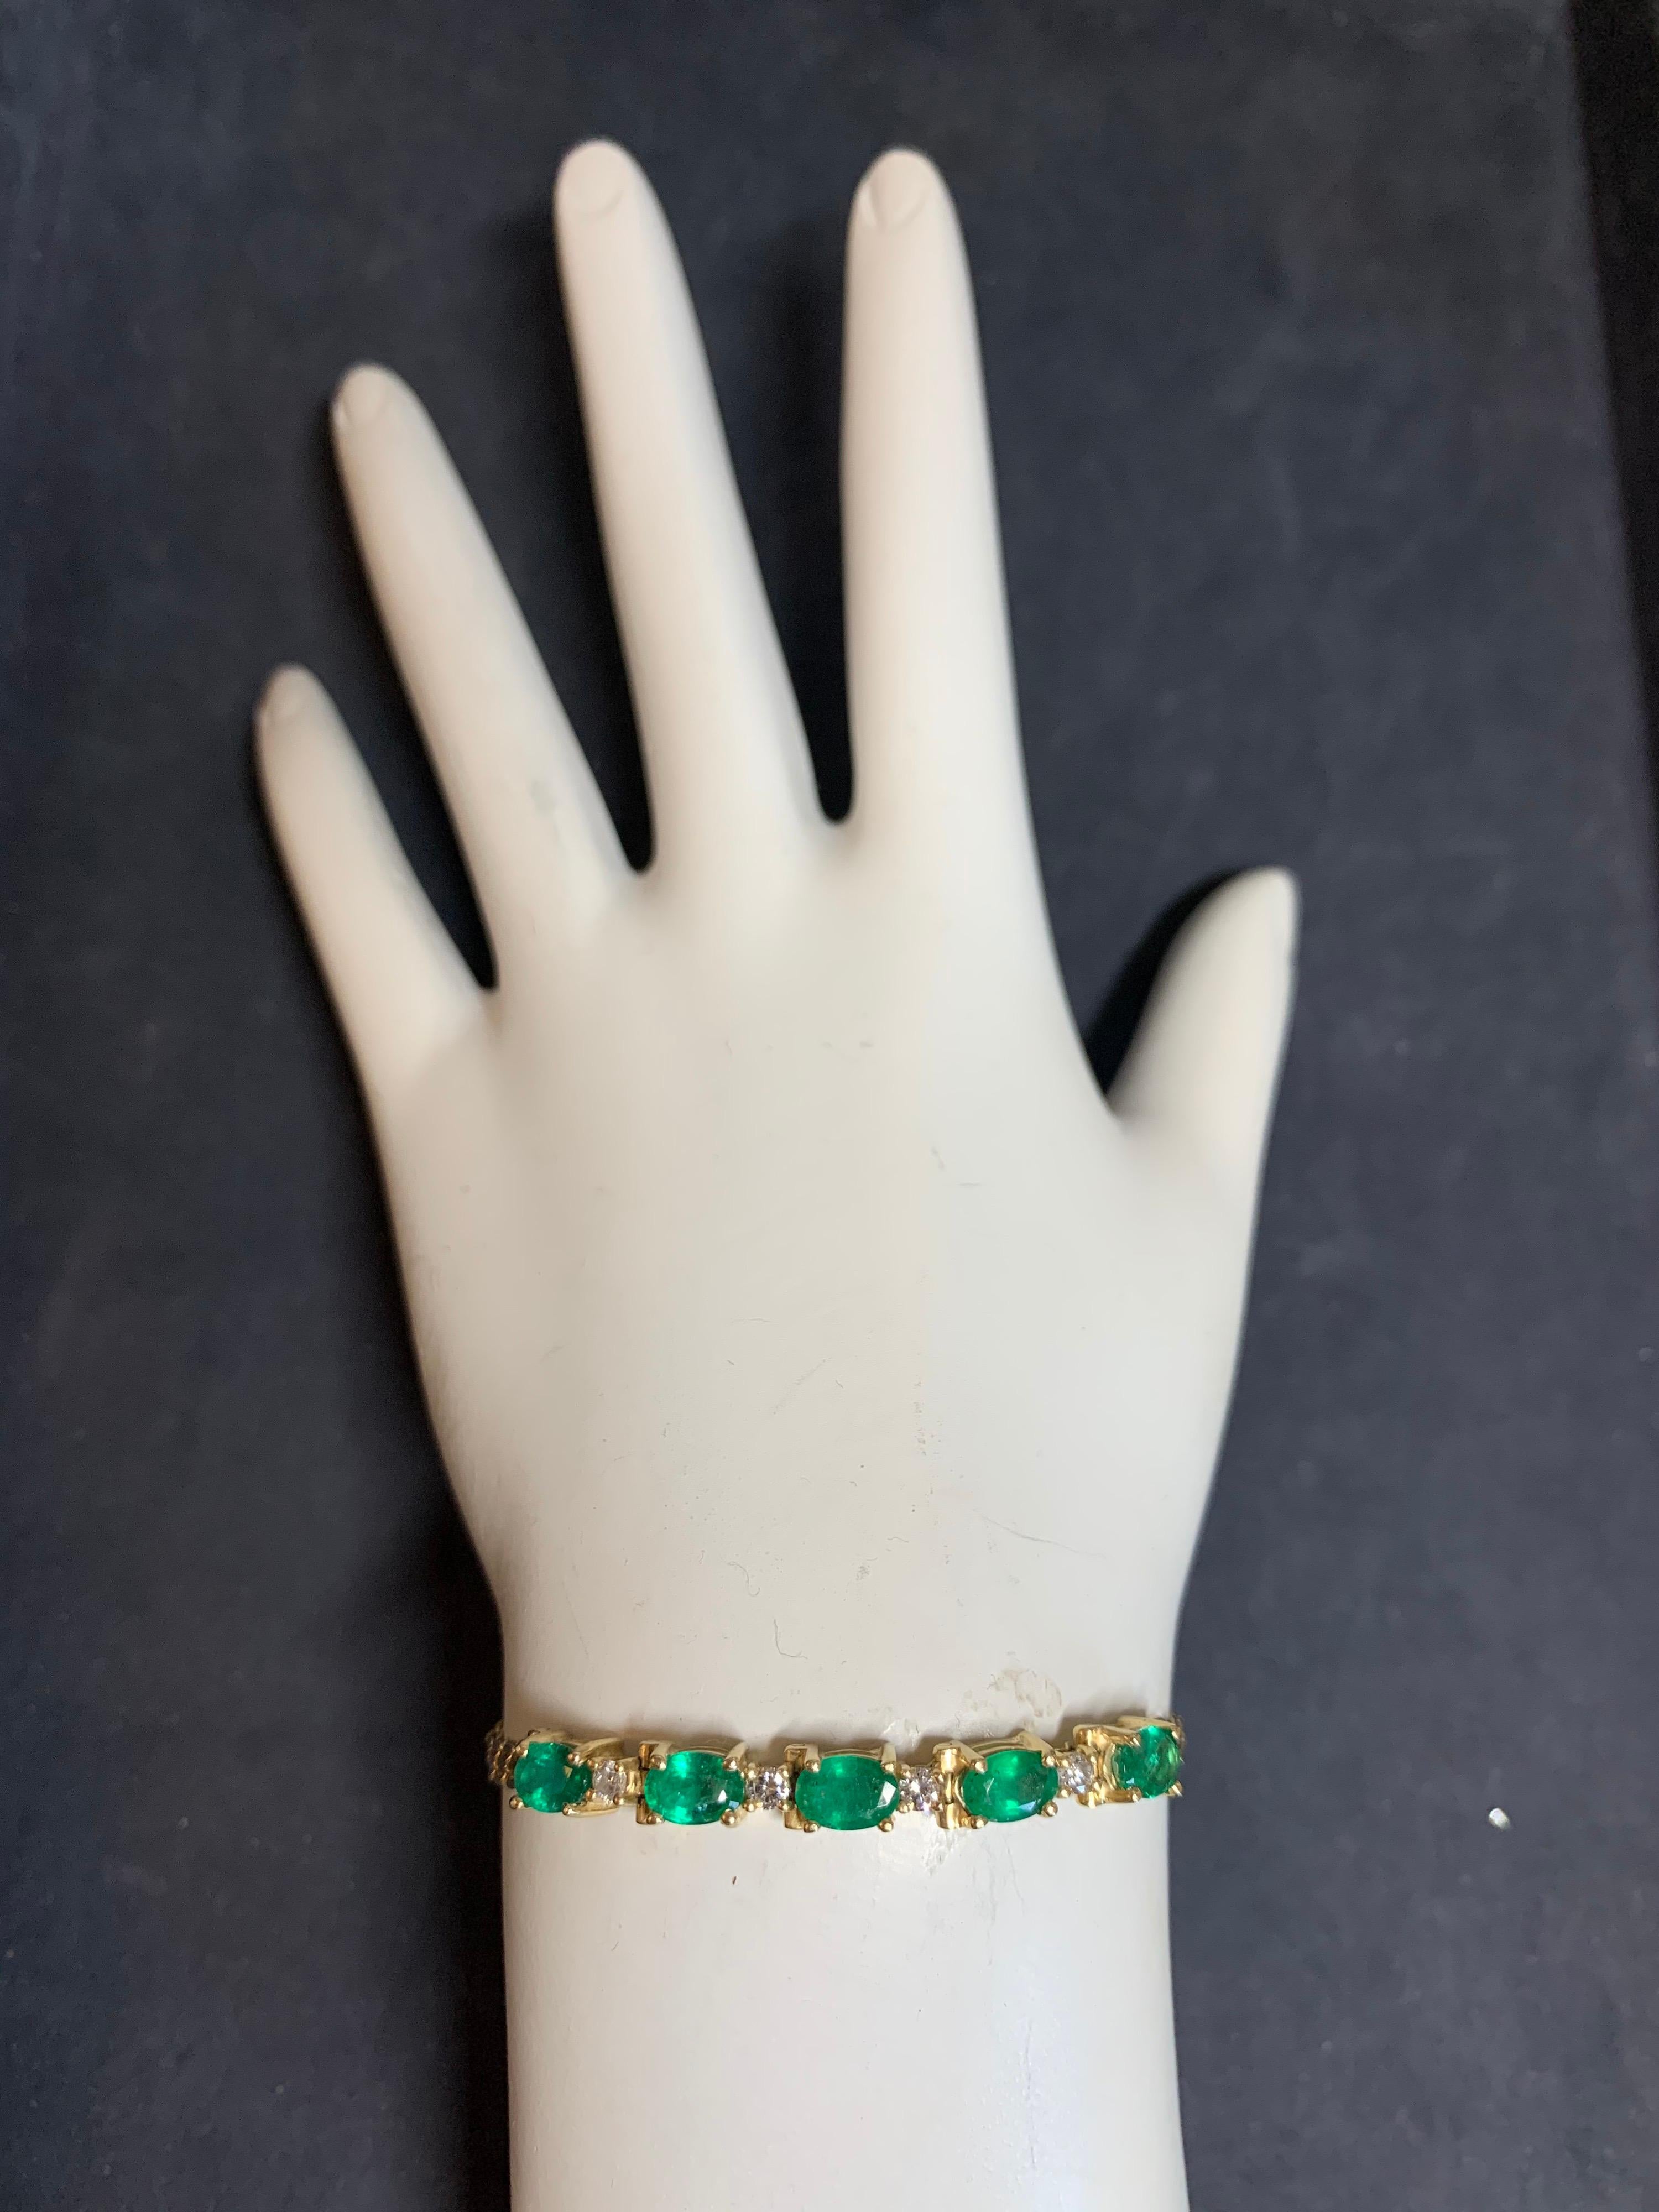 Modern 14k Yellow Gold Bracelet approximately 2.50 Carat Natural Oval Emerald & Diamond. 

The piece was set with 5 oval emeralds (6x4.1x2.8mm) and 4 natural round brilliant diamonds (G-H color, VS clarity). 

Bracelet weighs 6.6 grams and is 7